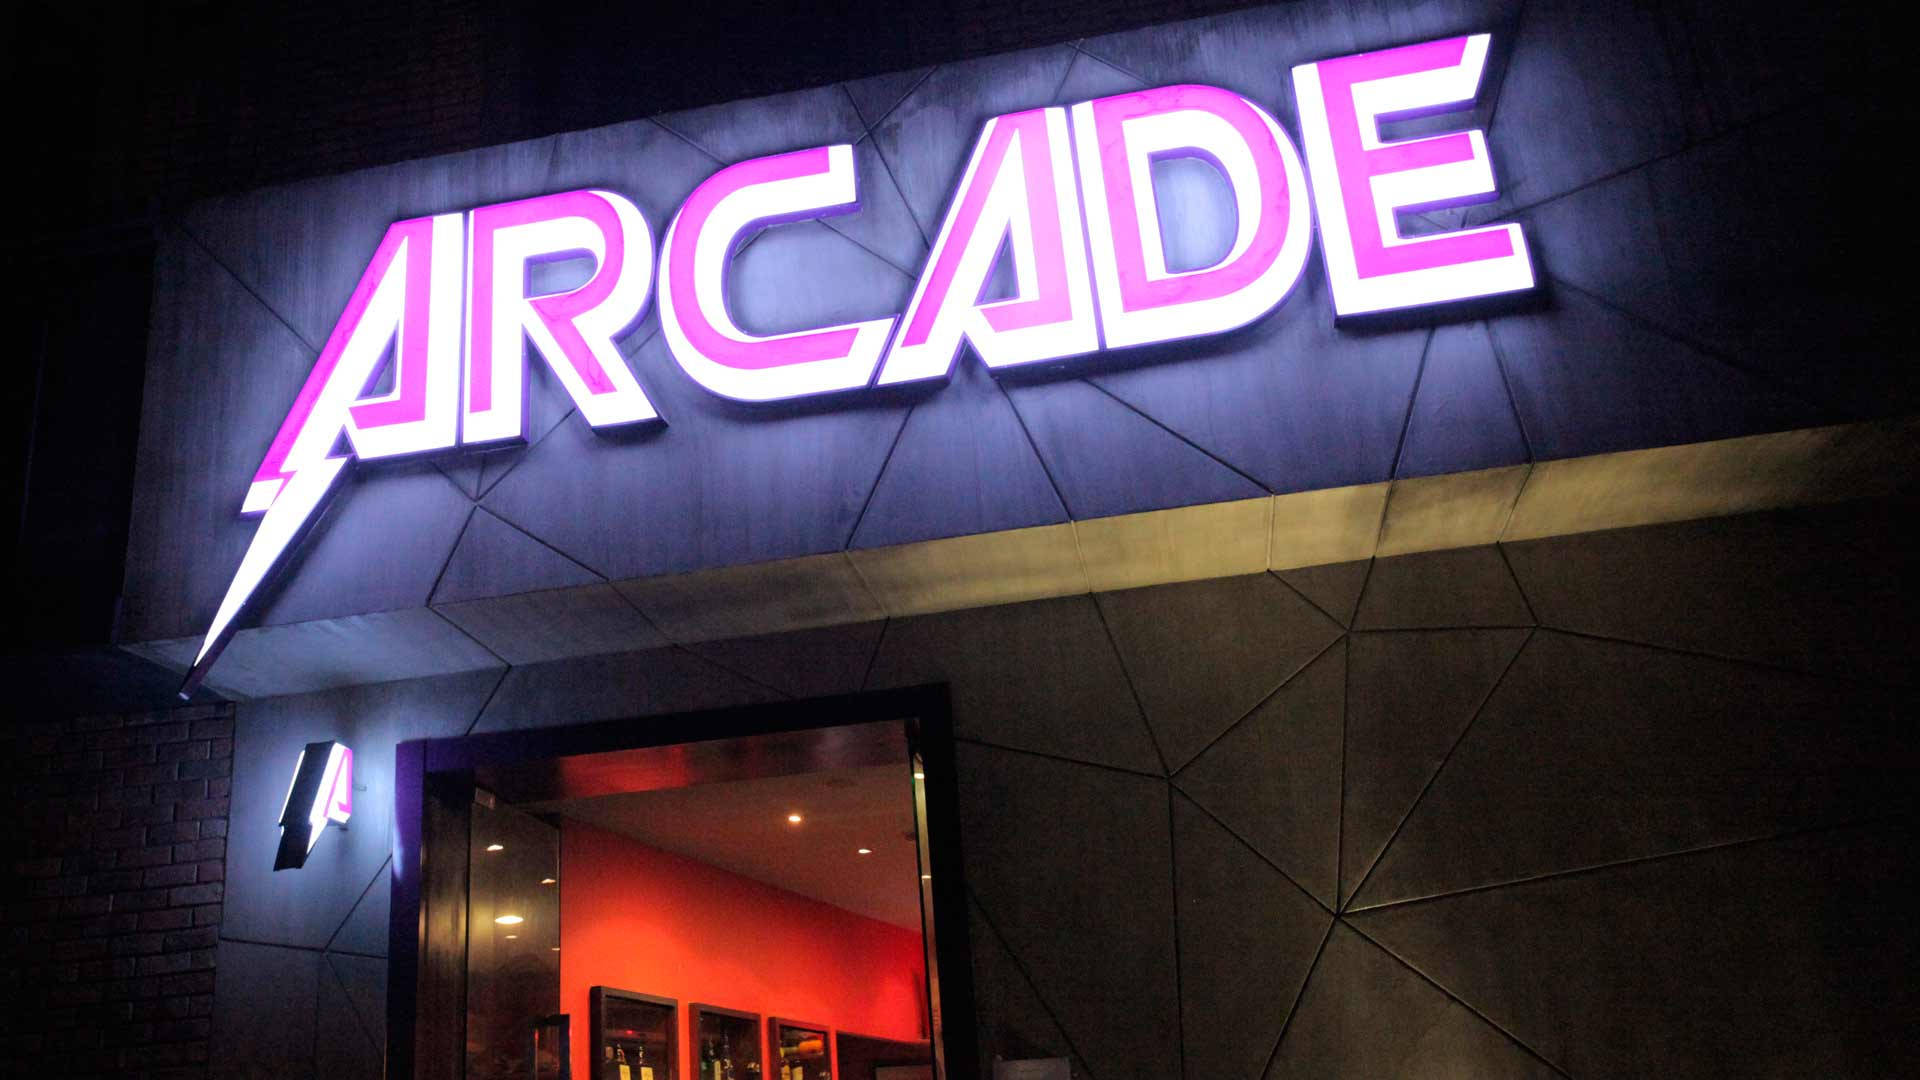 Step Inside and Enjoy a Classic Arcade Experience Wallpaper